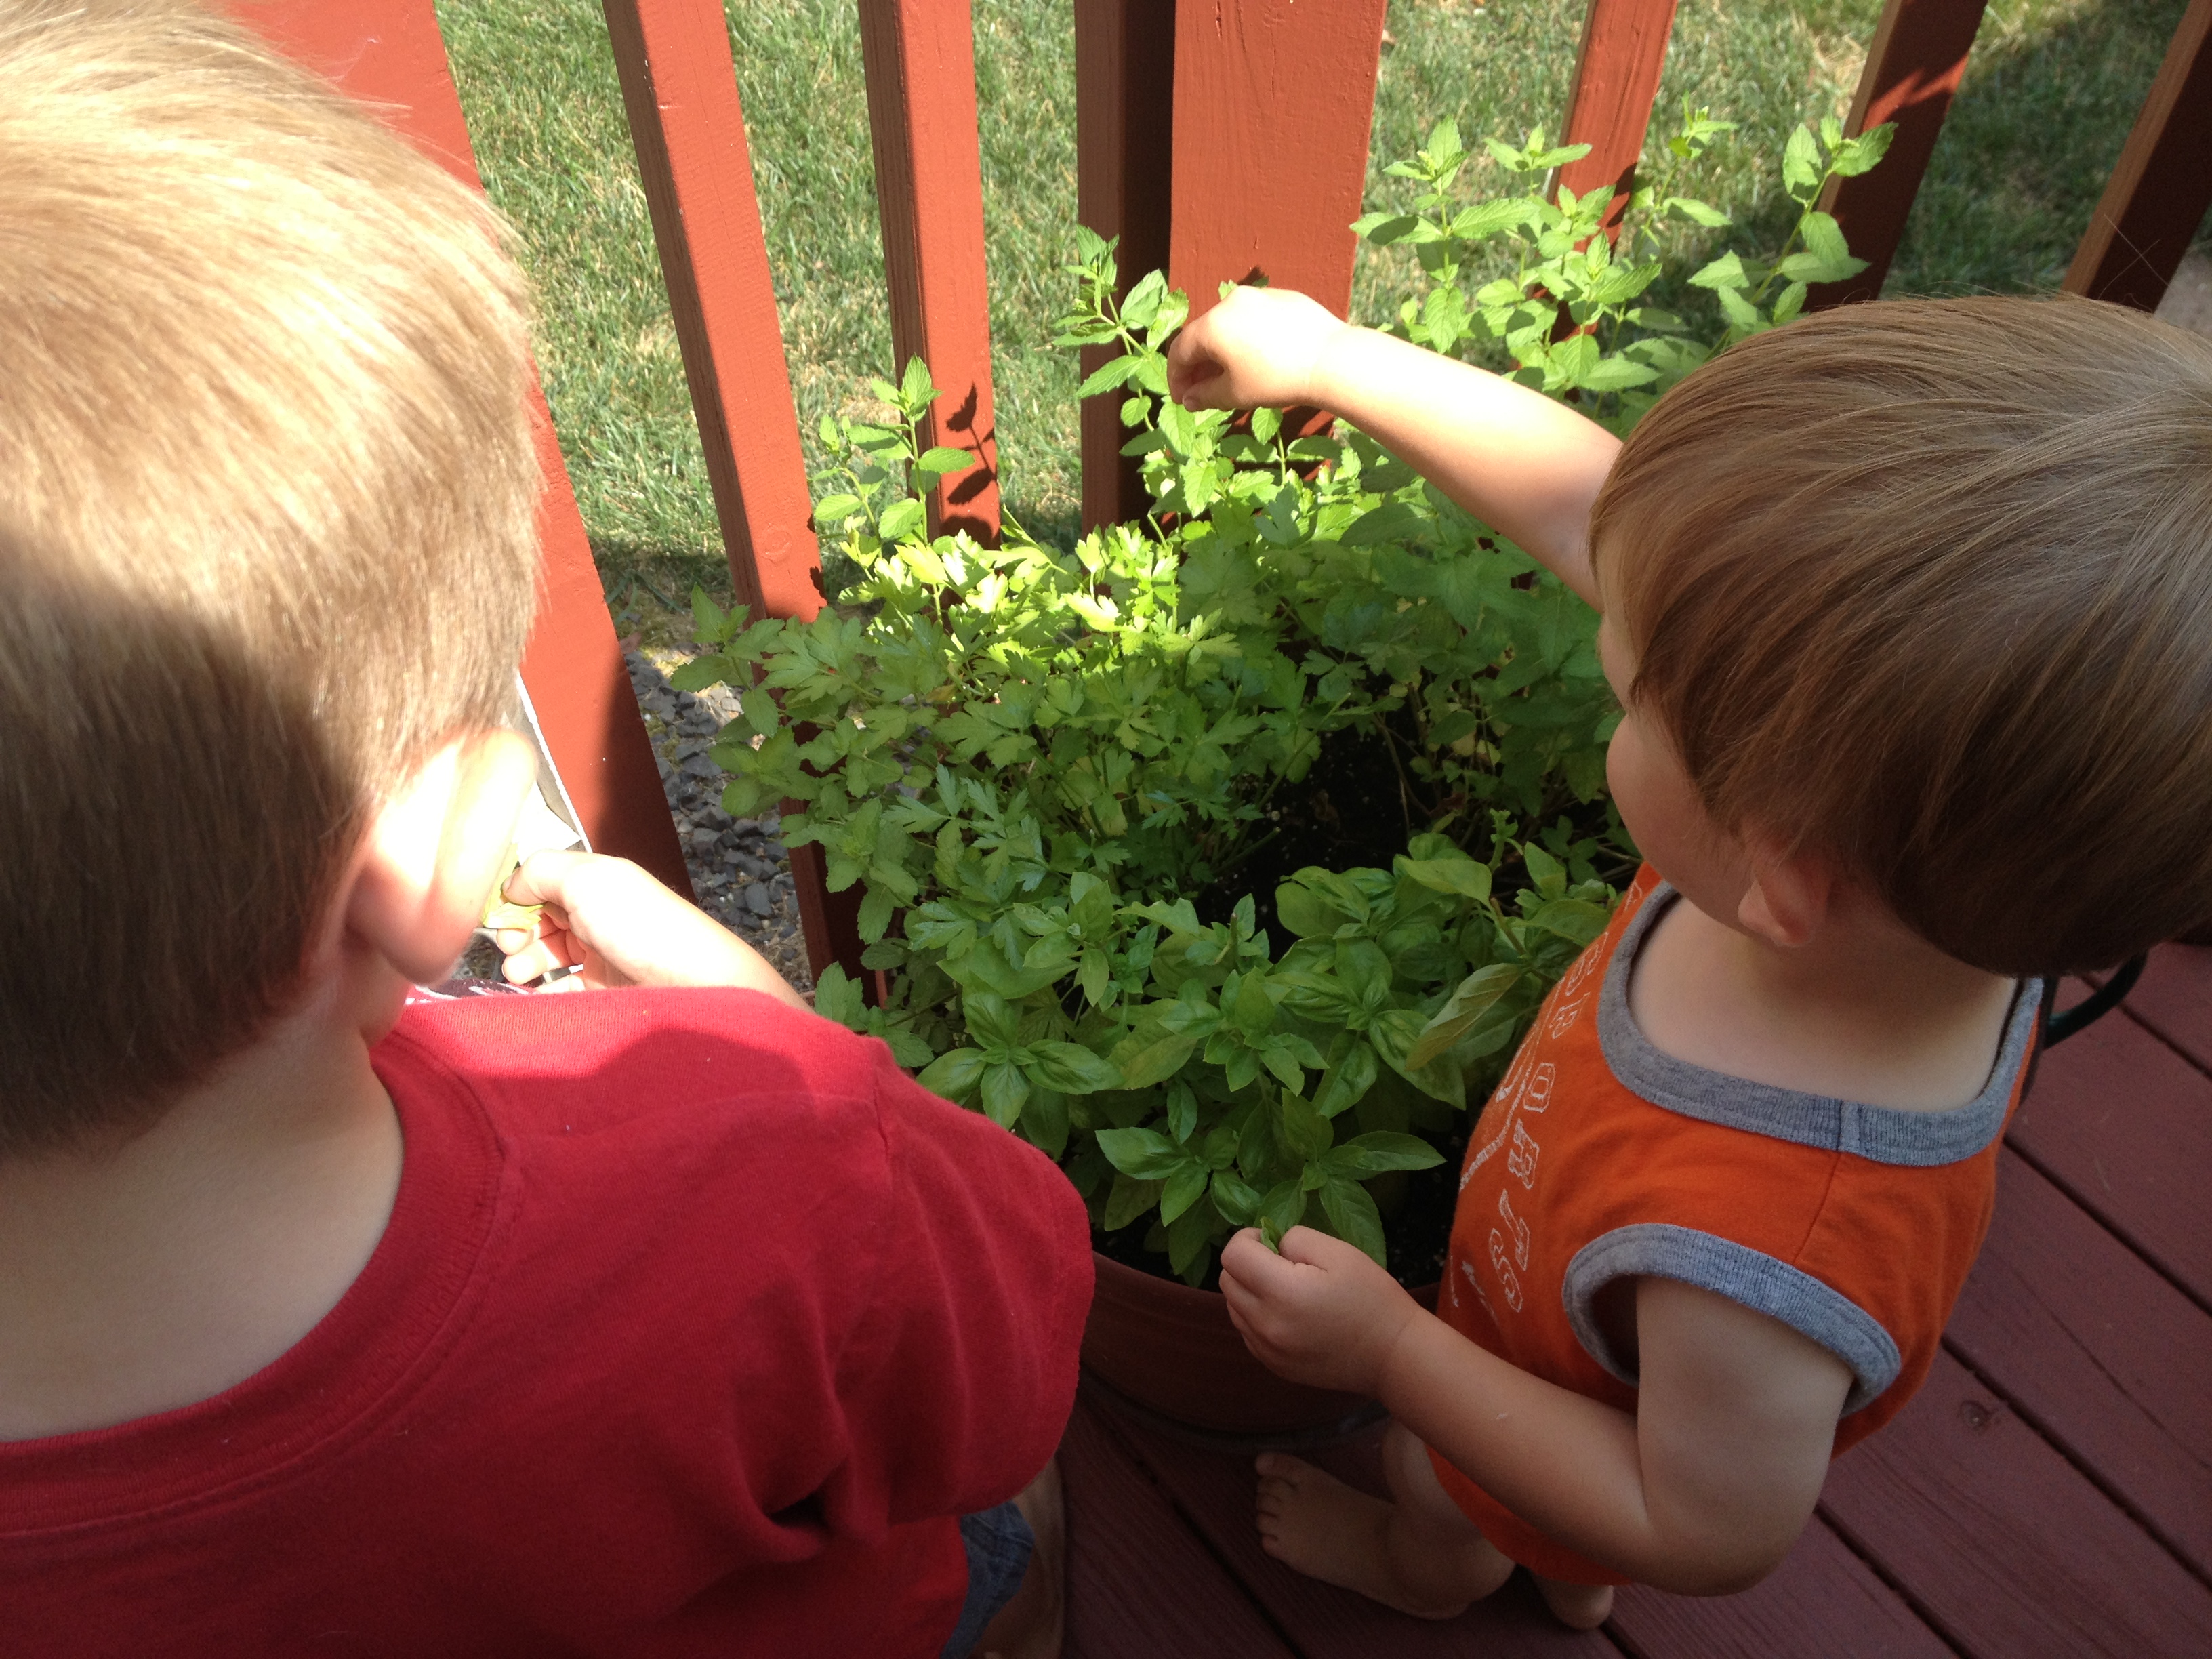 Planting basil and parsley are a great first garden options for kids (and adults)!